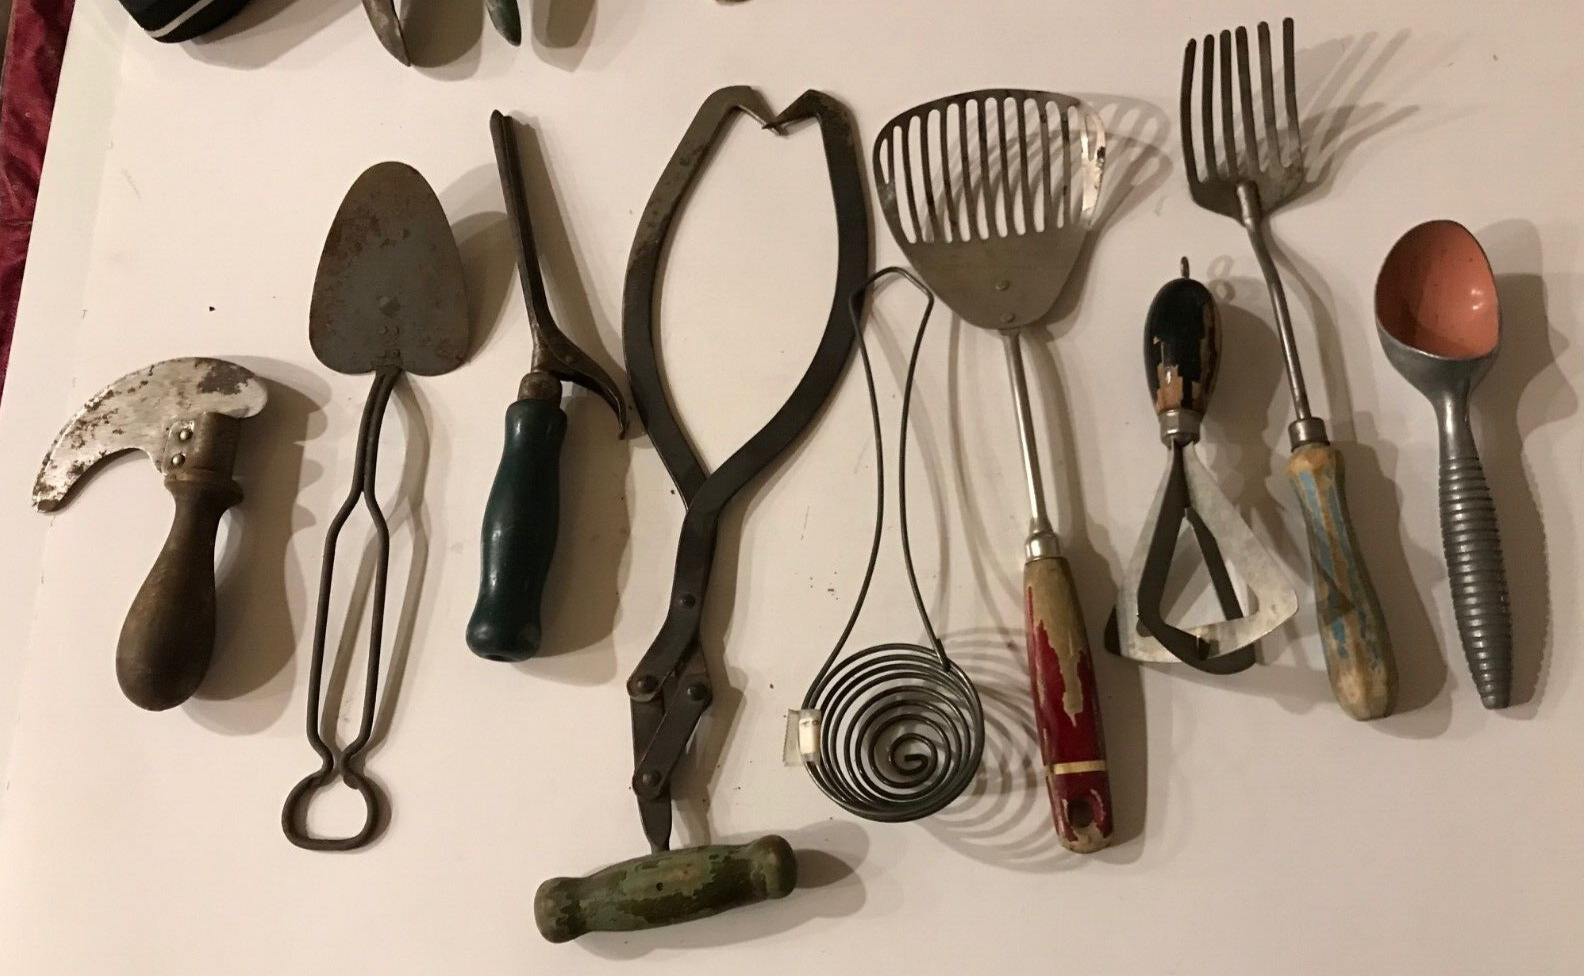 VINTAGE KITCHEN TOOLS: 9 TOOLS: AS SHOWN